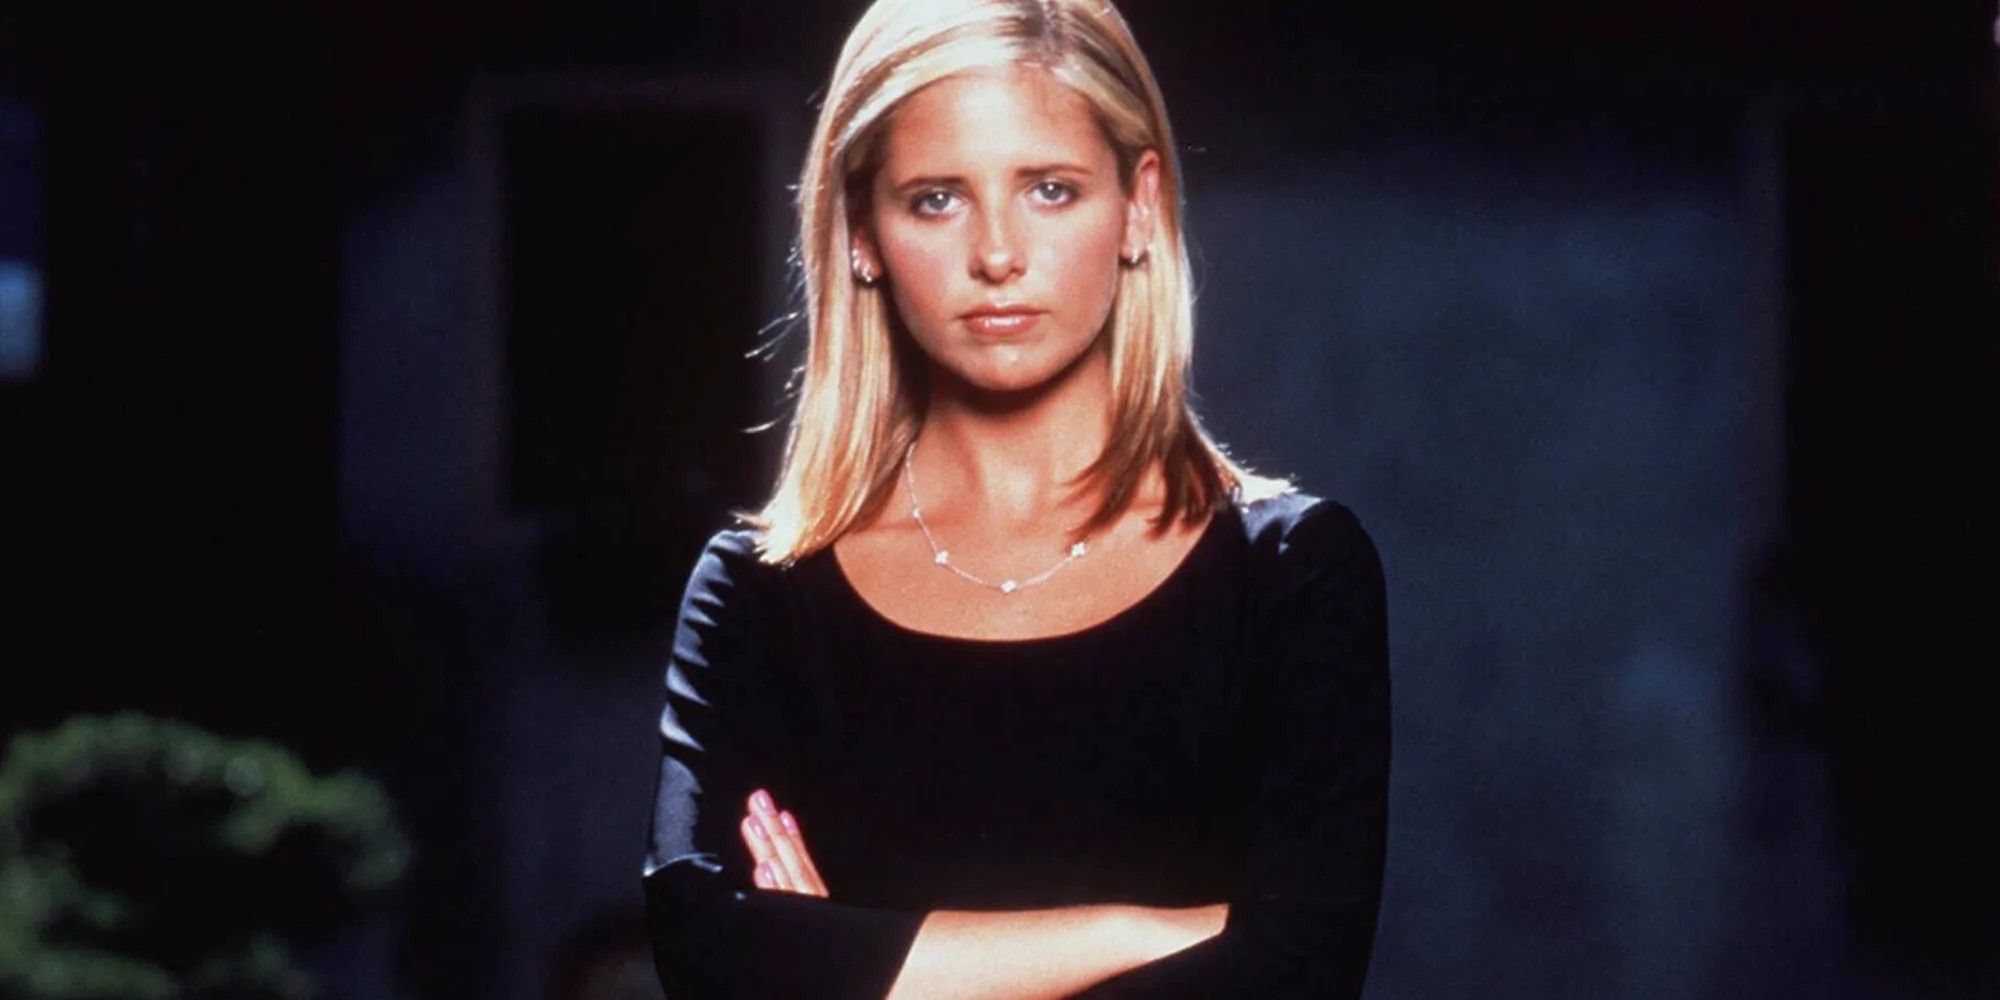 Buffy Summers, played by Sarah Michelle Gellar, in Buffy the Vampire Slayer